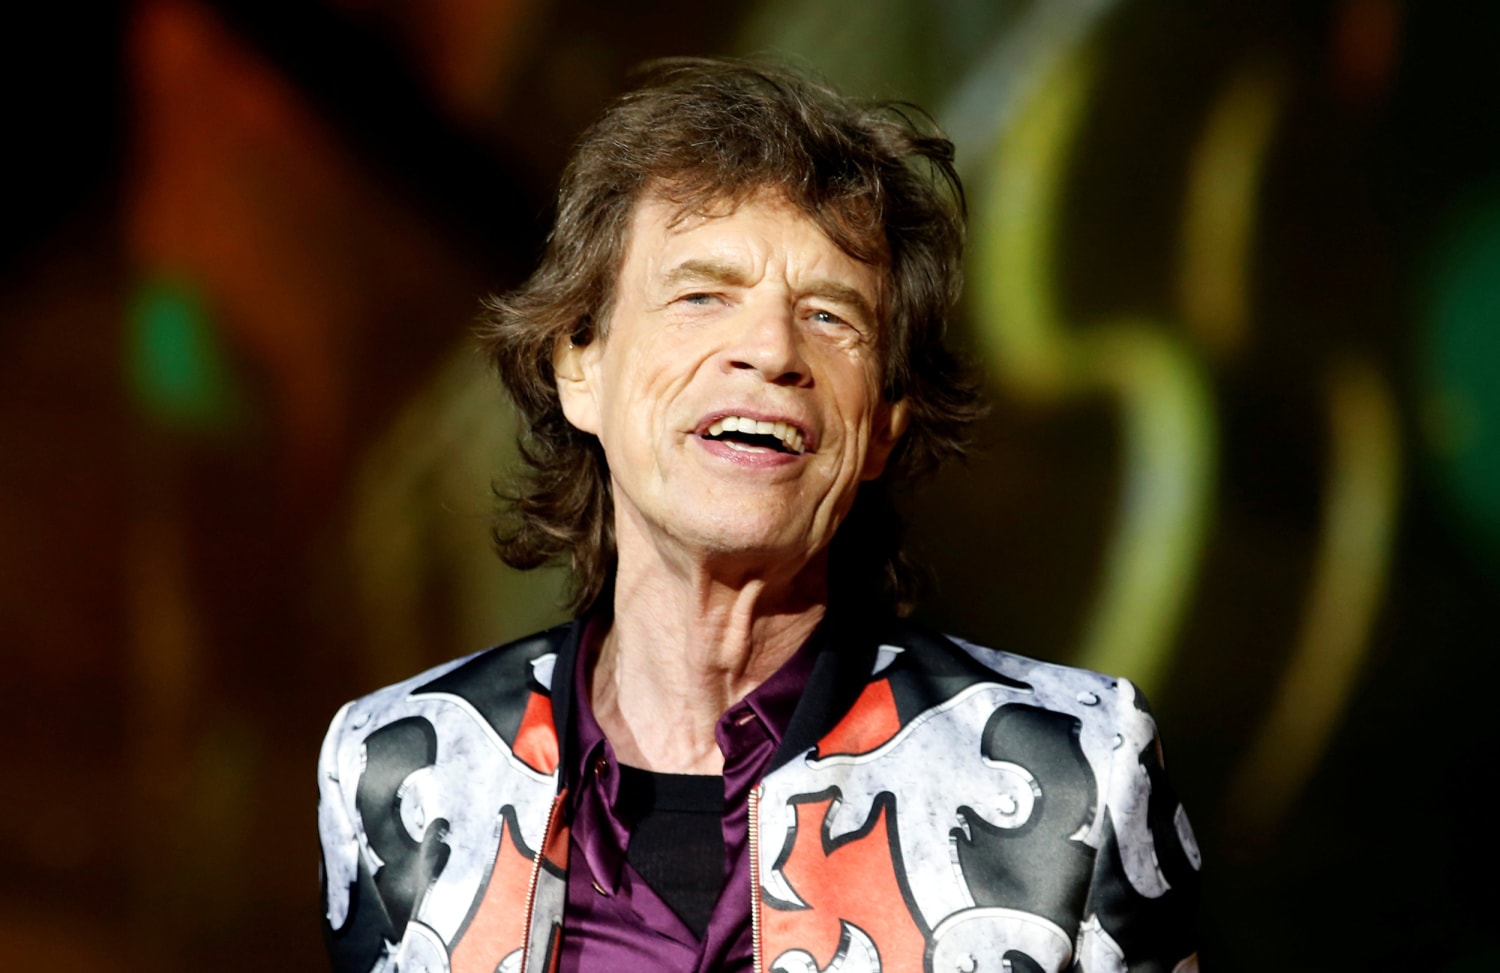 Rolling Stones frontman Mick Jagger reportedly to undergo heart surgery